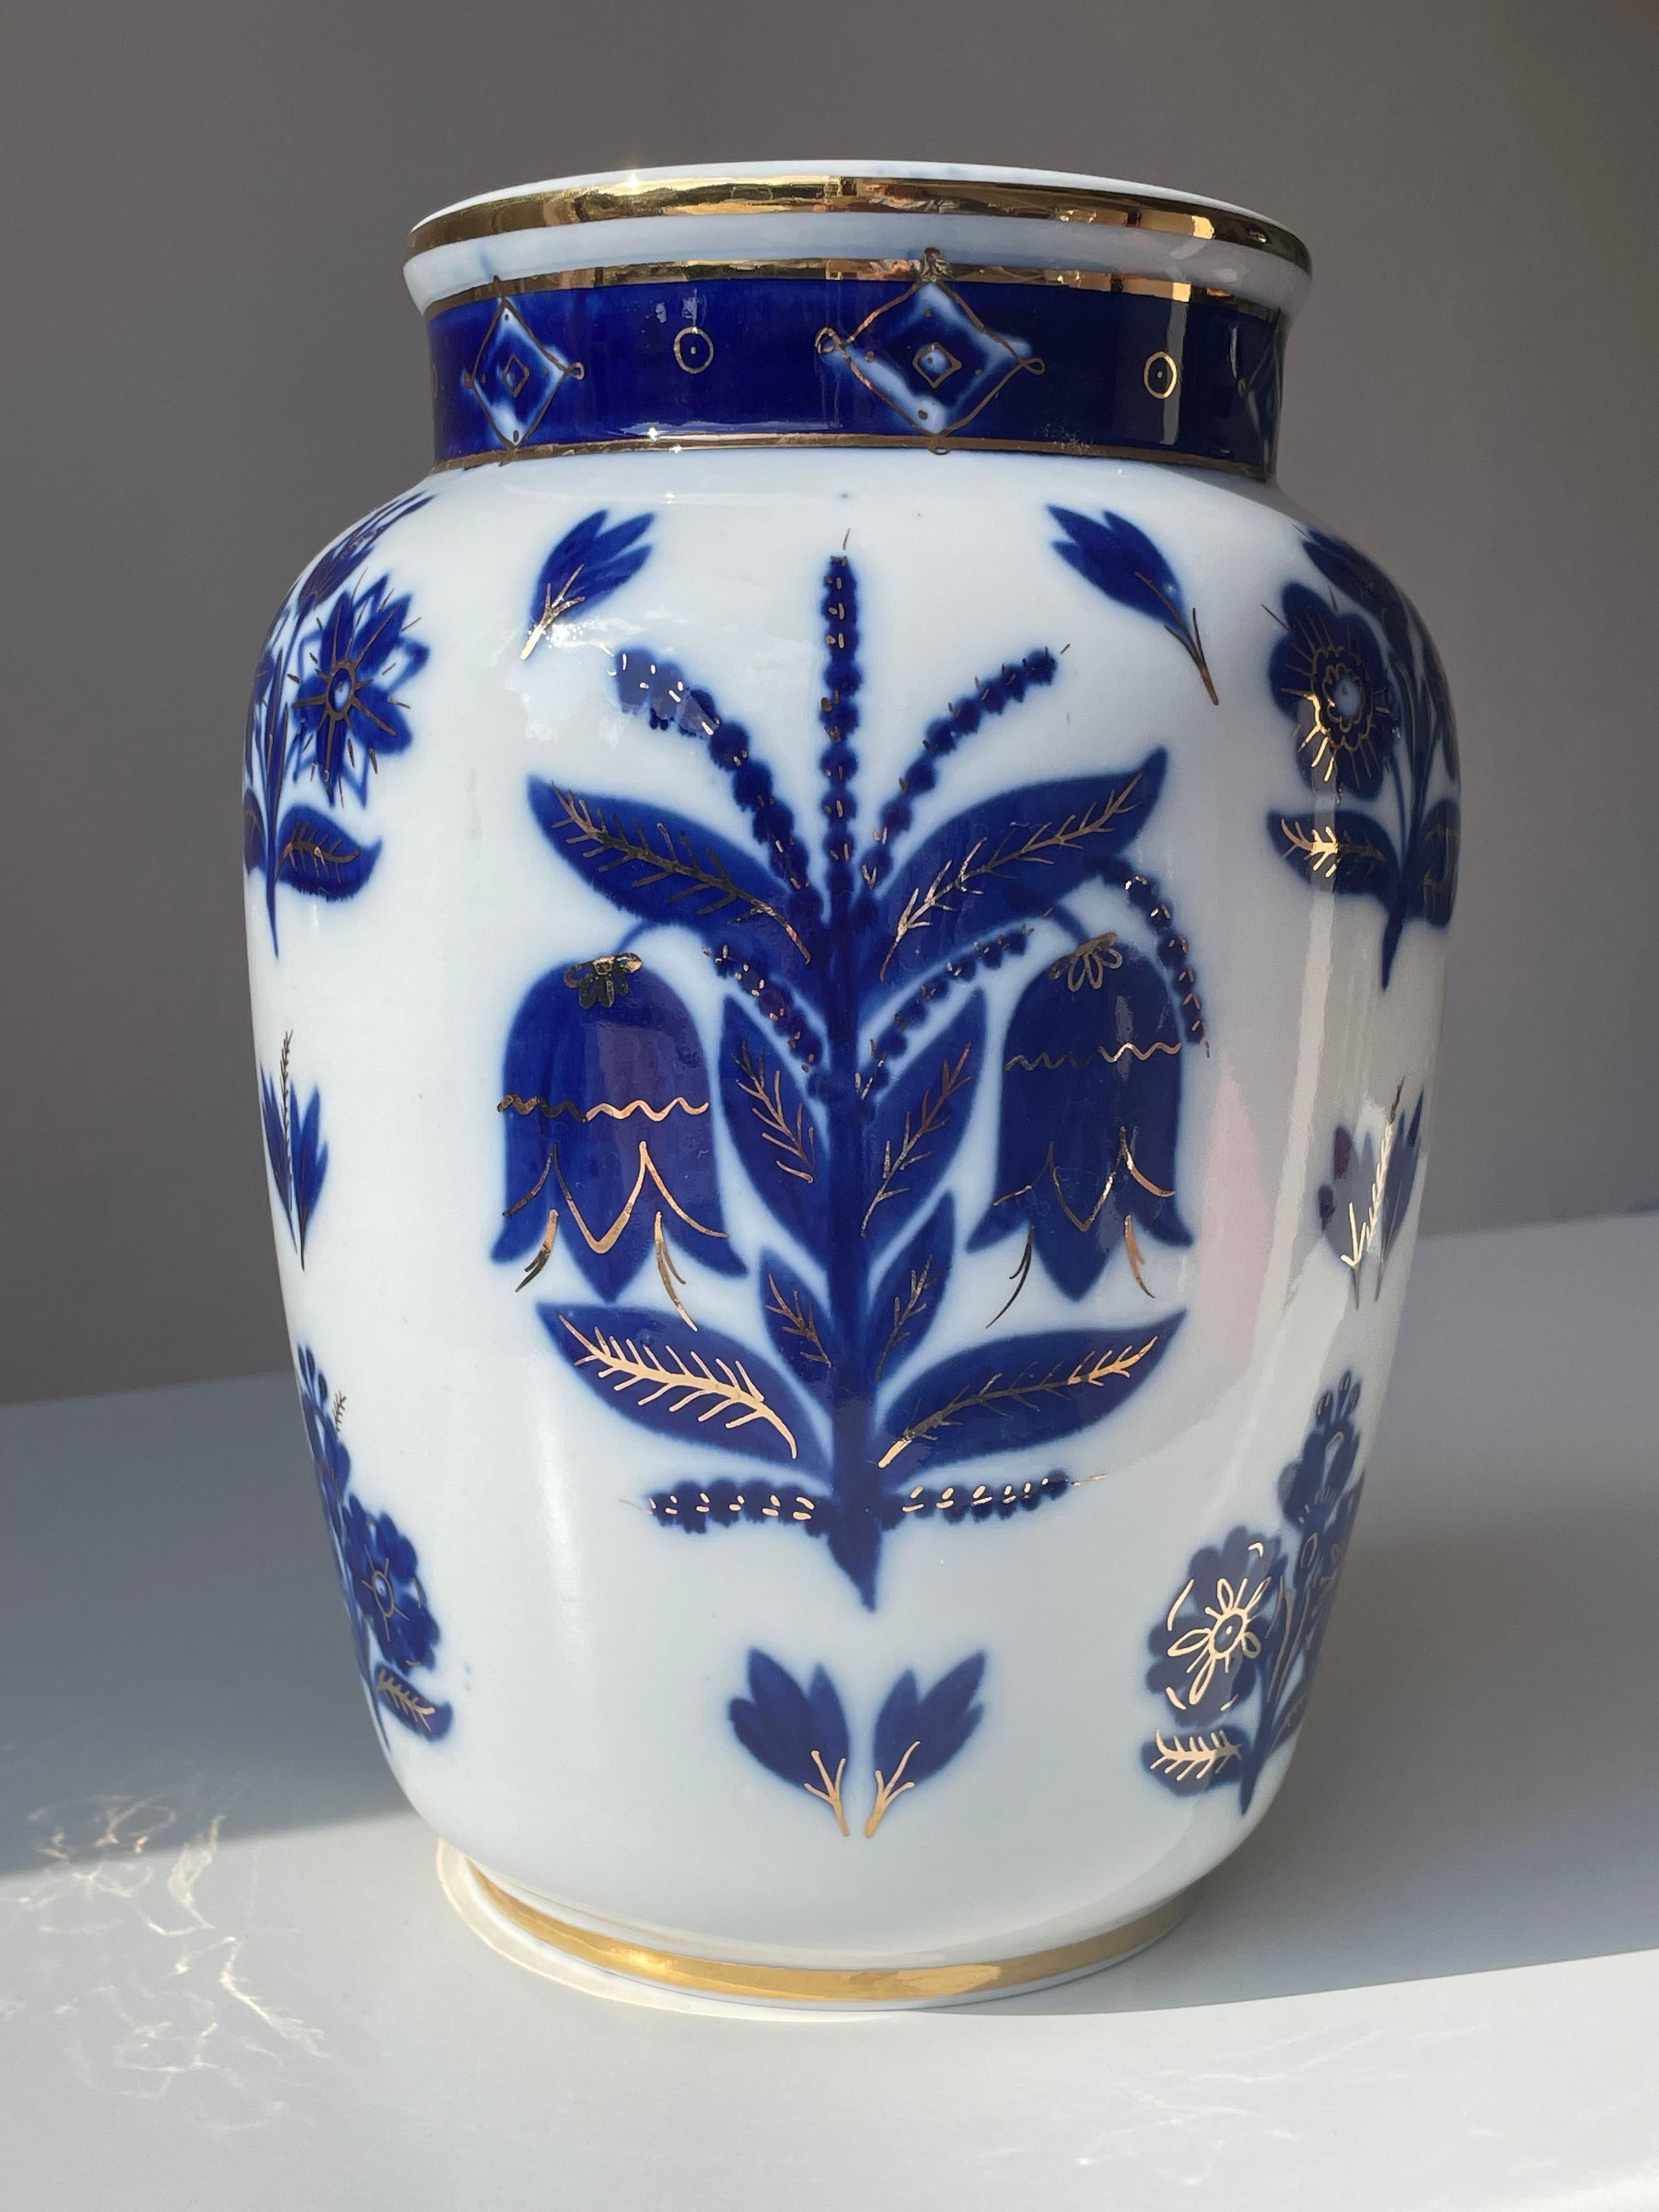 Large Russian white, blue and gold floral porcelain vase manufactured in the 1950s by the Lomonosov Porcelain Factory which was founded in 1744. Soft shaped organic Mid-Century Modern vase decorated by hand with large stunning bright mineral cobalt